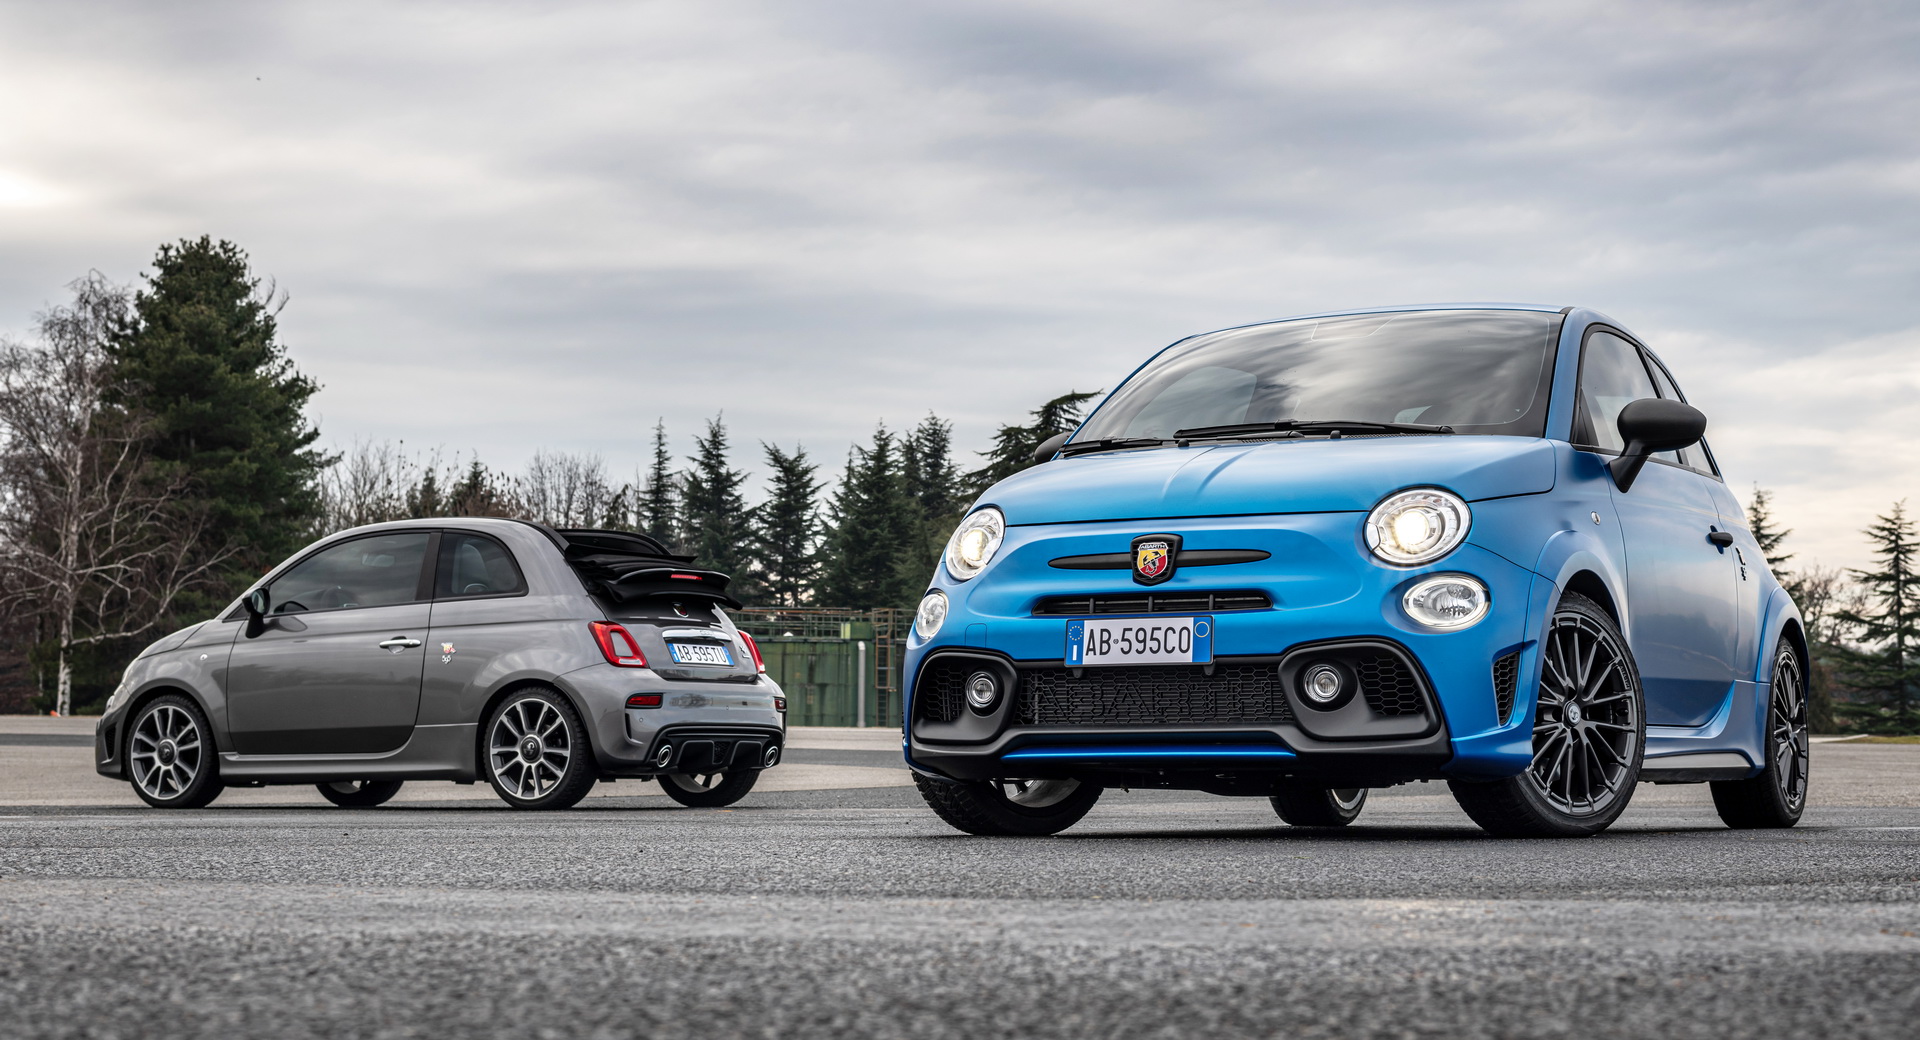 Fiat’s Refreshed Abarth 595 Range Brings New Options And A